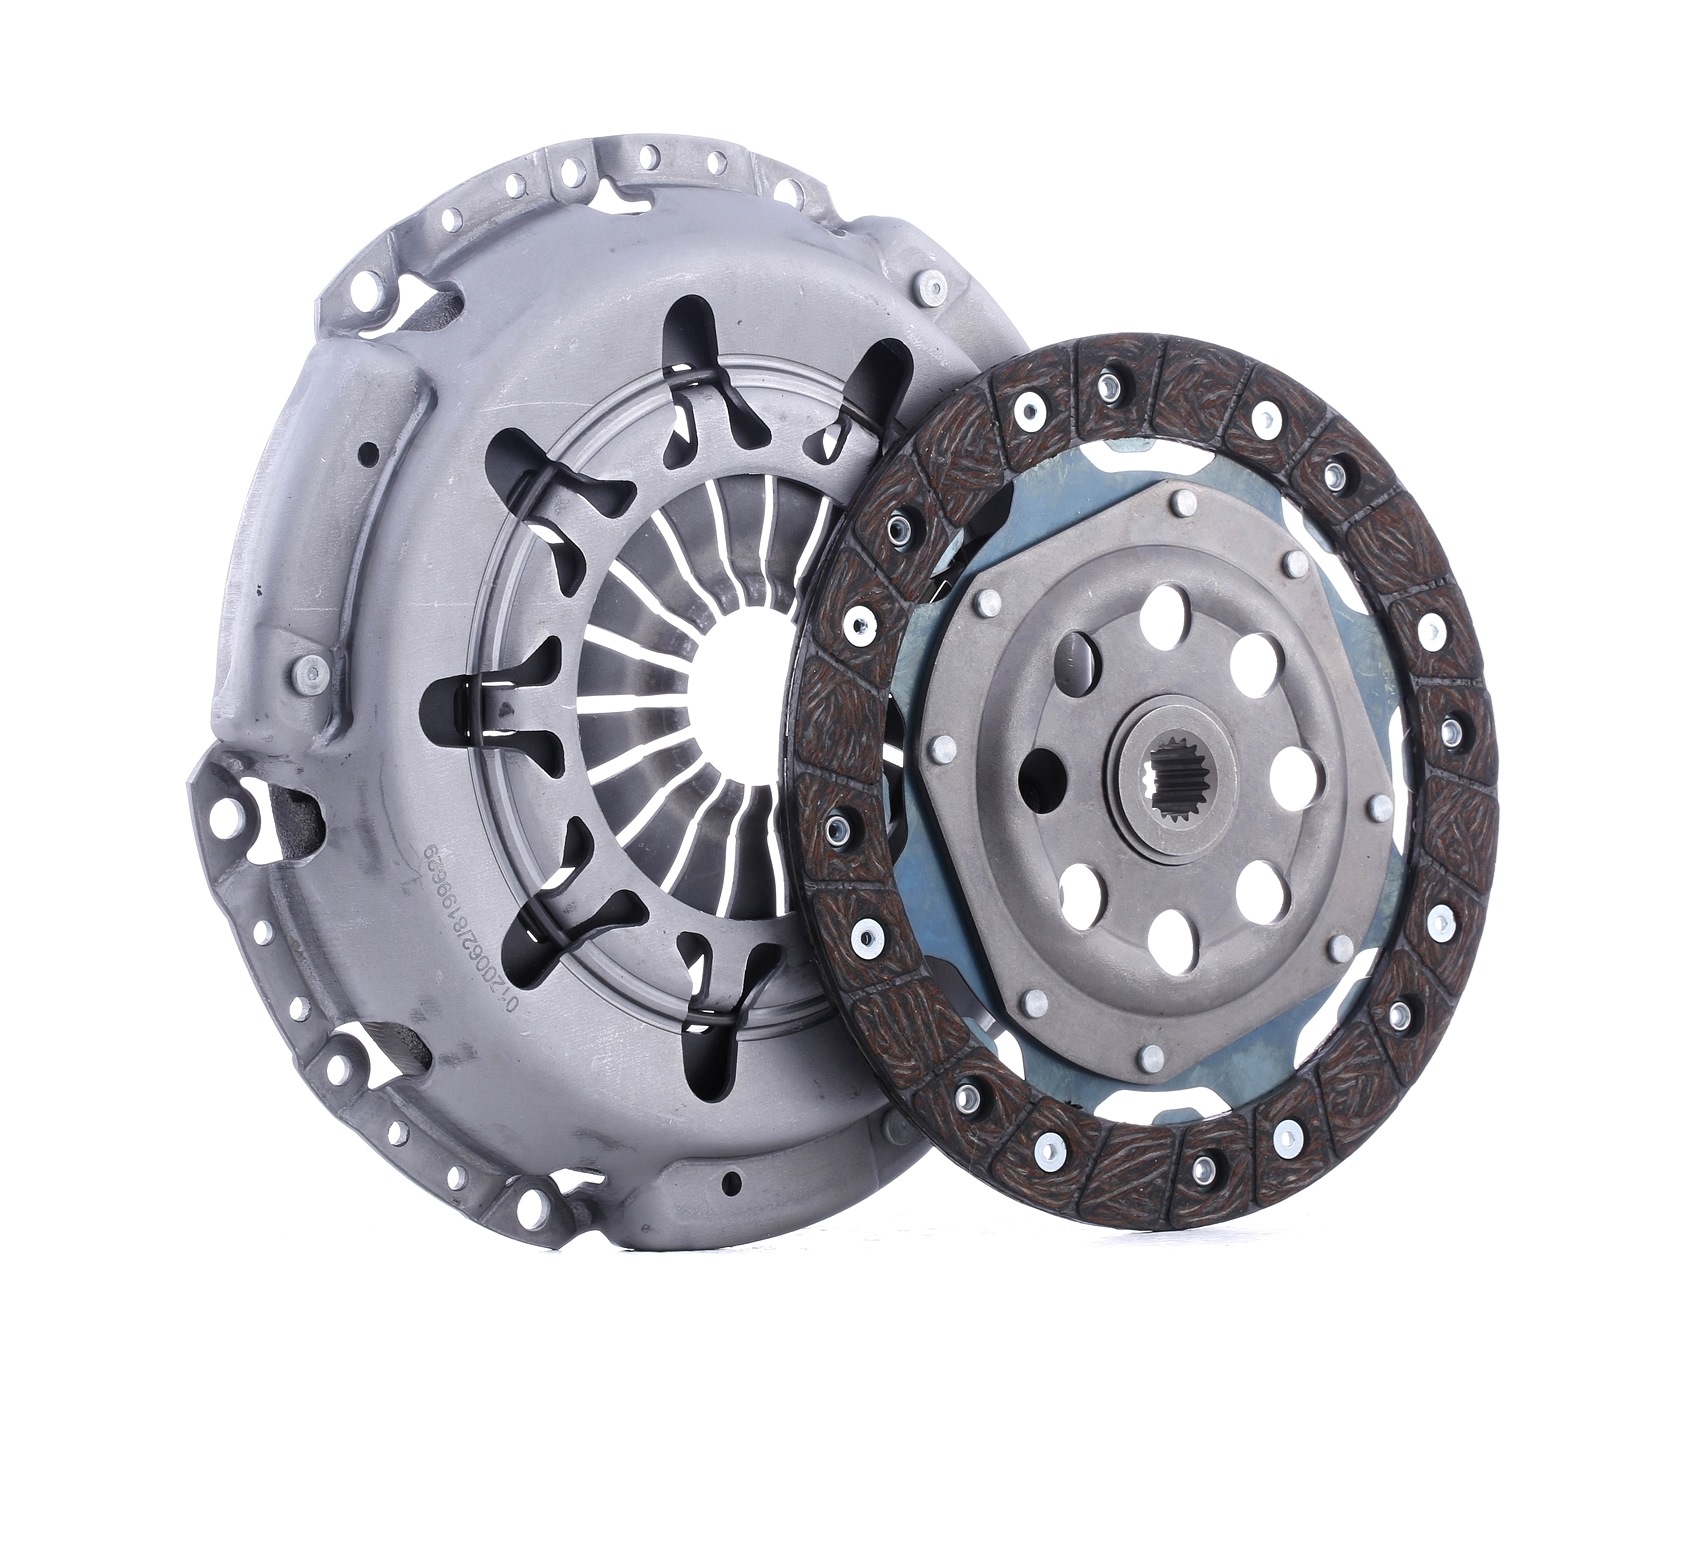 STARK SKCK-0100227 Clutch kit two-piece, with clutch pressure plate, with clutch disc, without clutch release bearing, 210mm